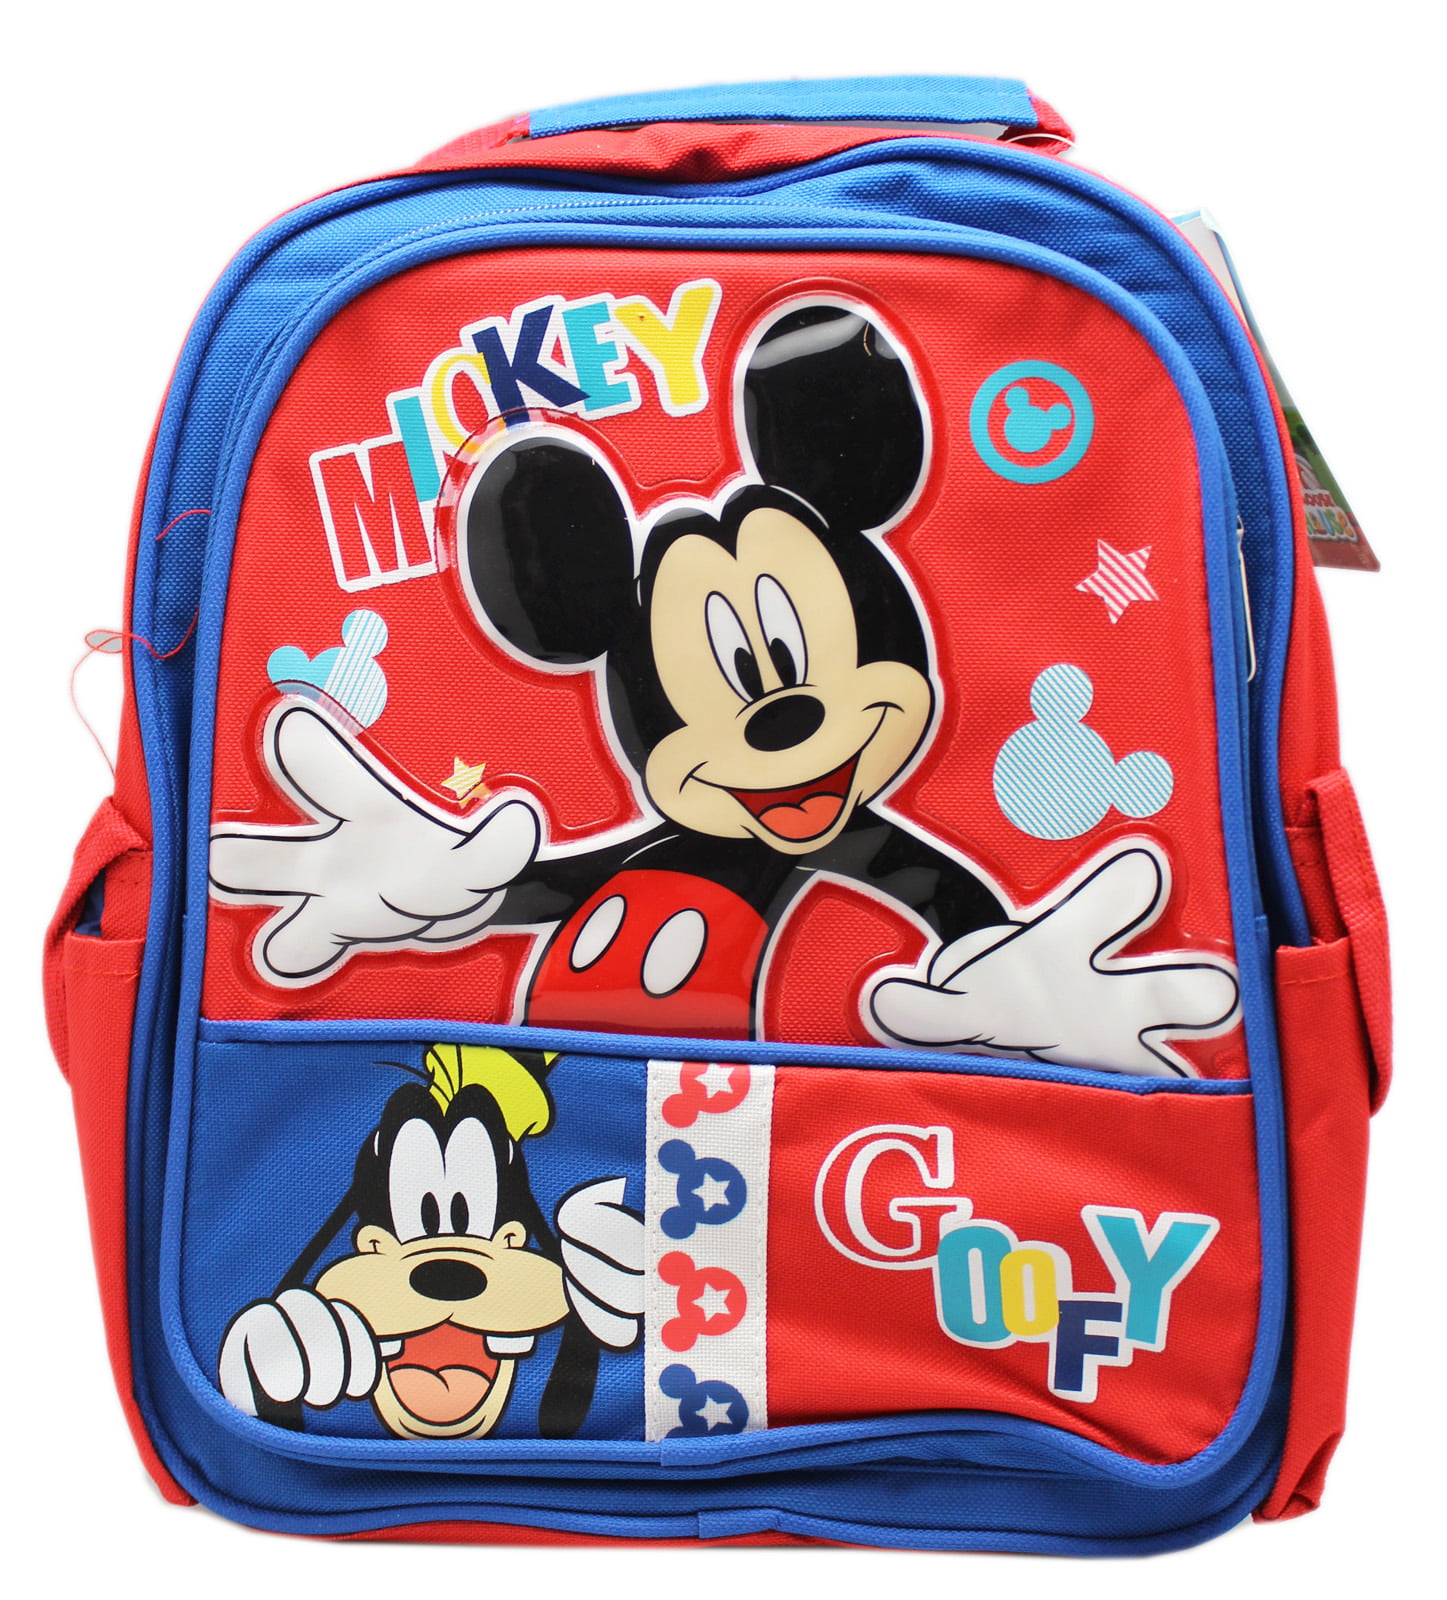 Disney Mickey Mouse Backpack for Kids Blue